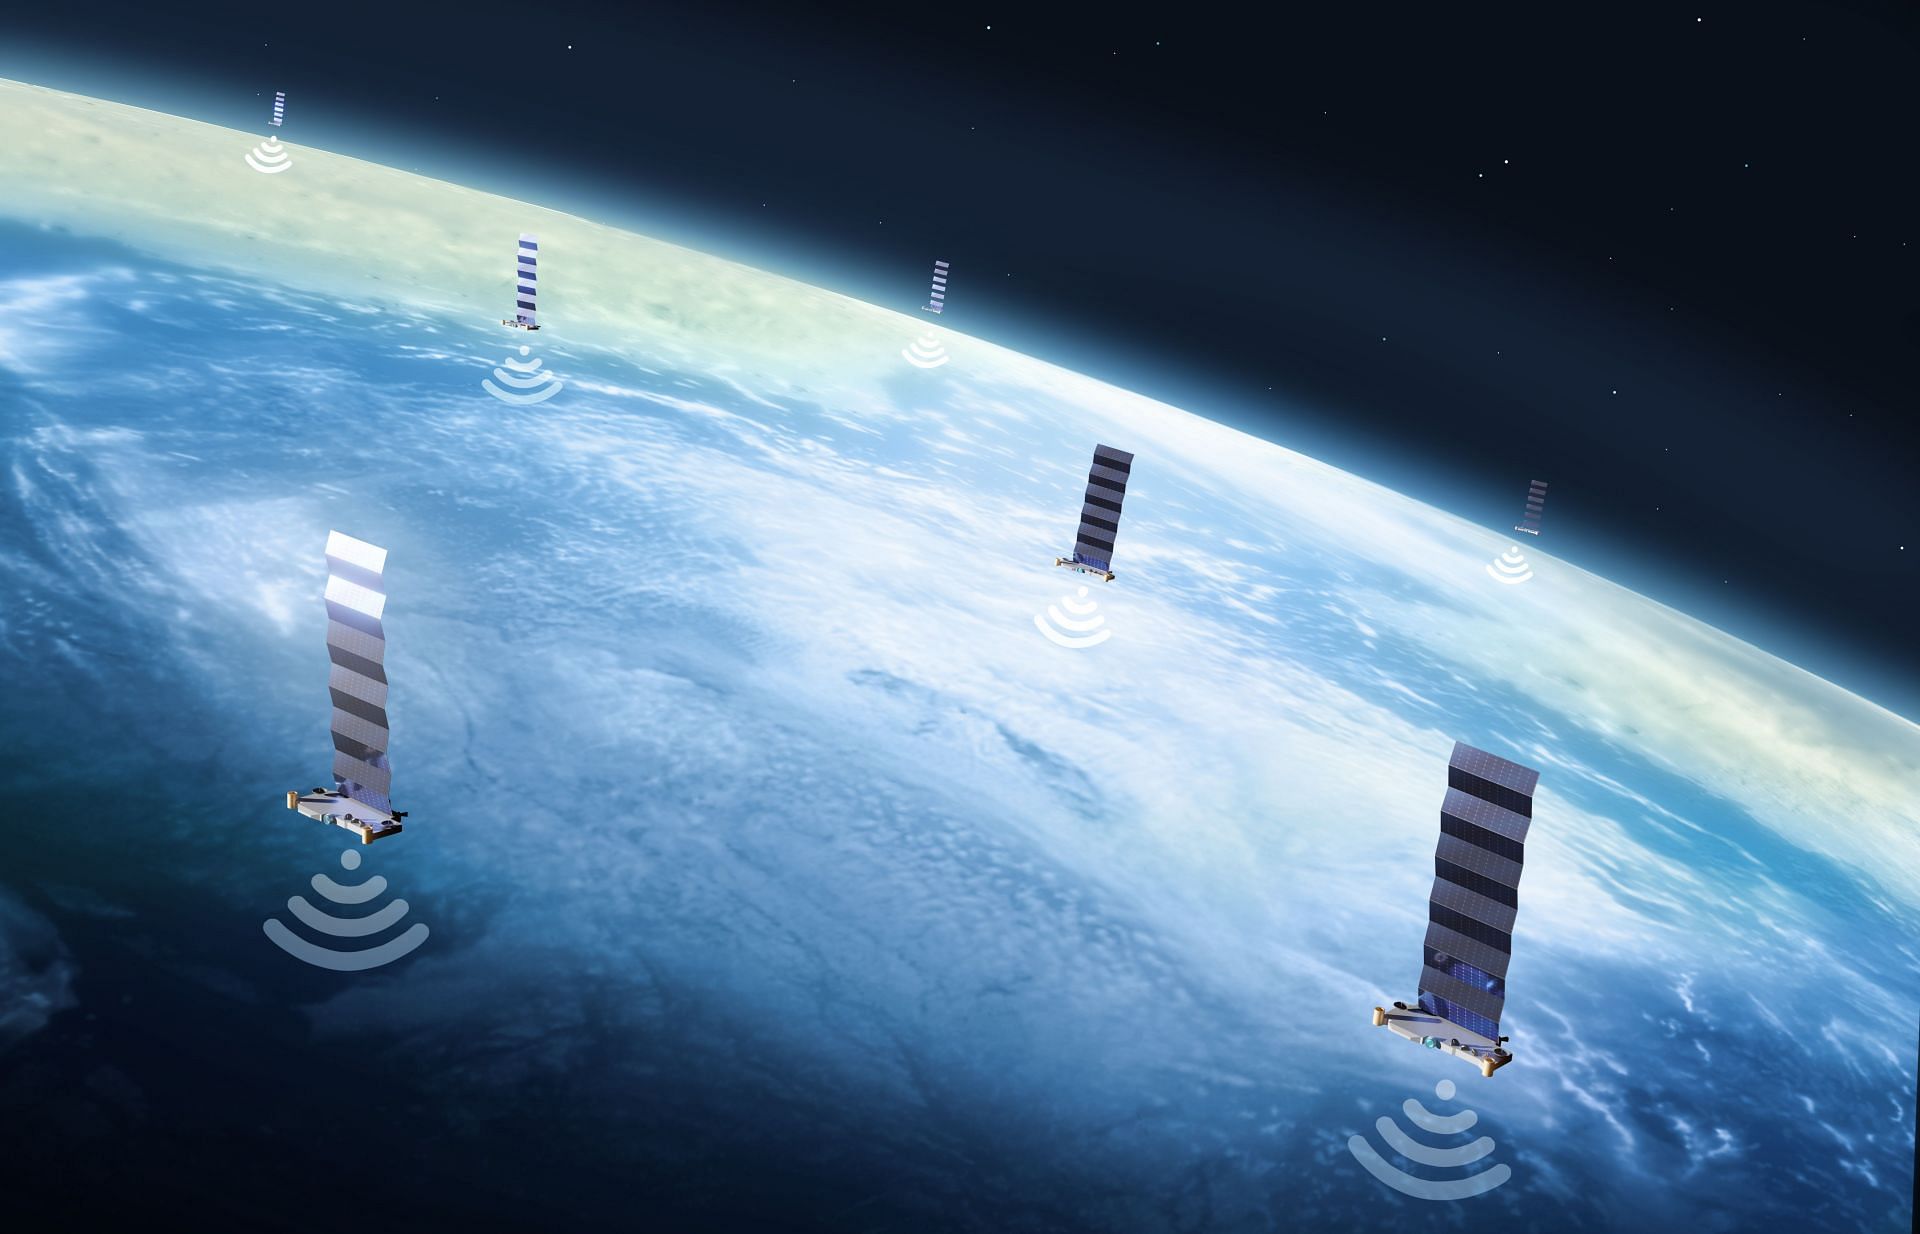 Illustrative image of satellite internet service (Image via Mark Garlick/Science Photo Library/Getty Images)